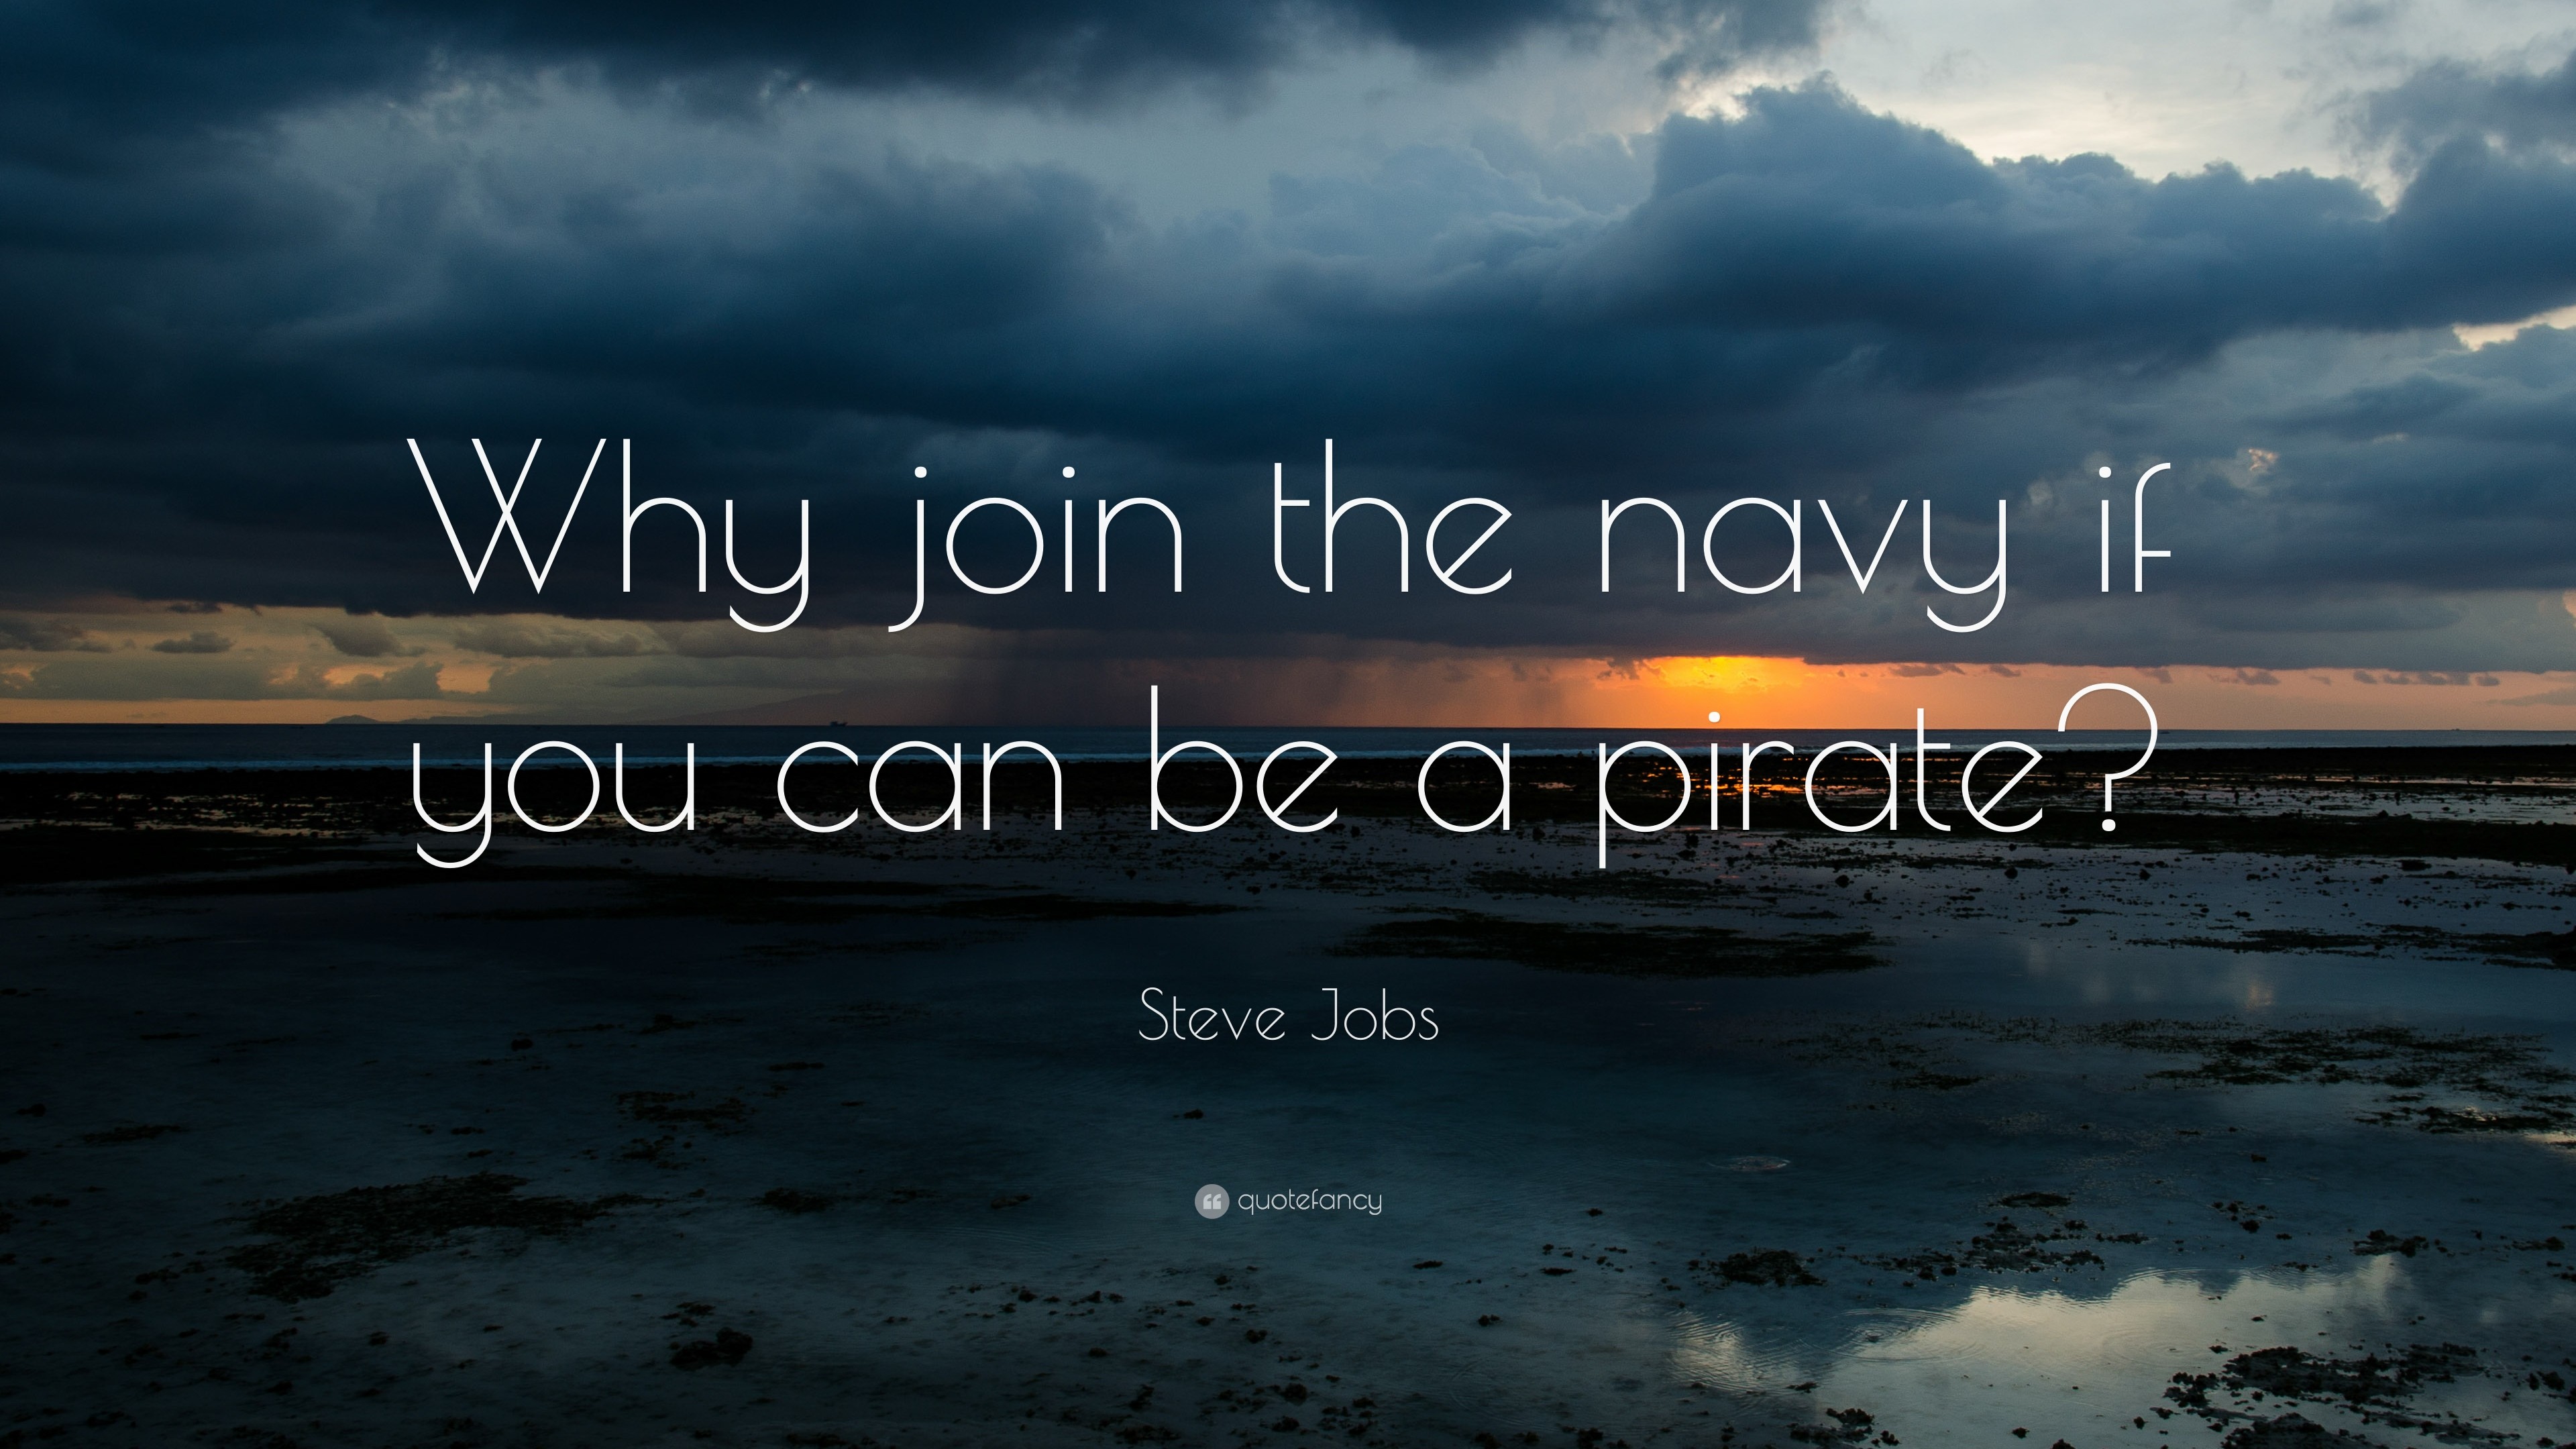 3840x2160 Funny Quotes: “Why join the navy if you can be a pirate?”